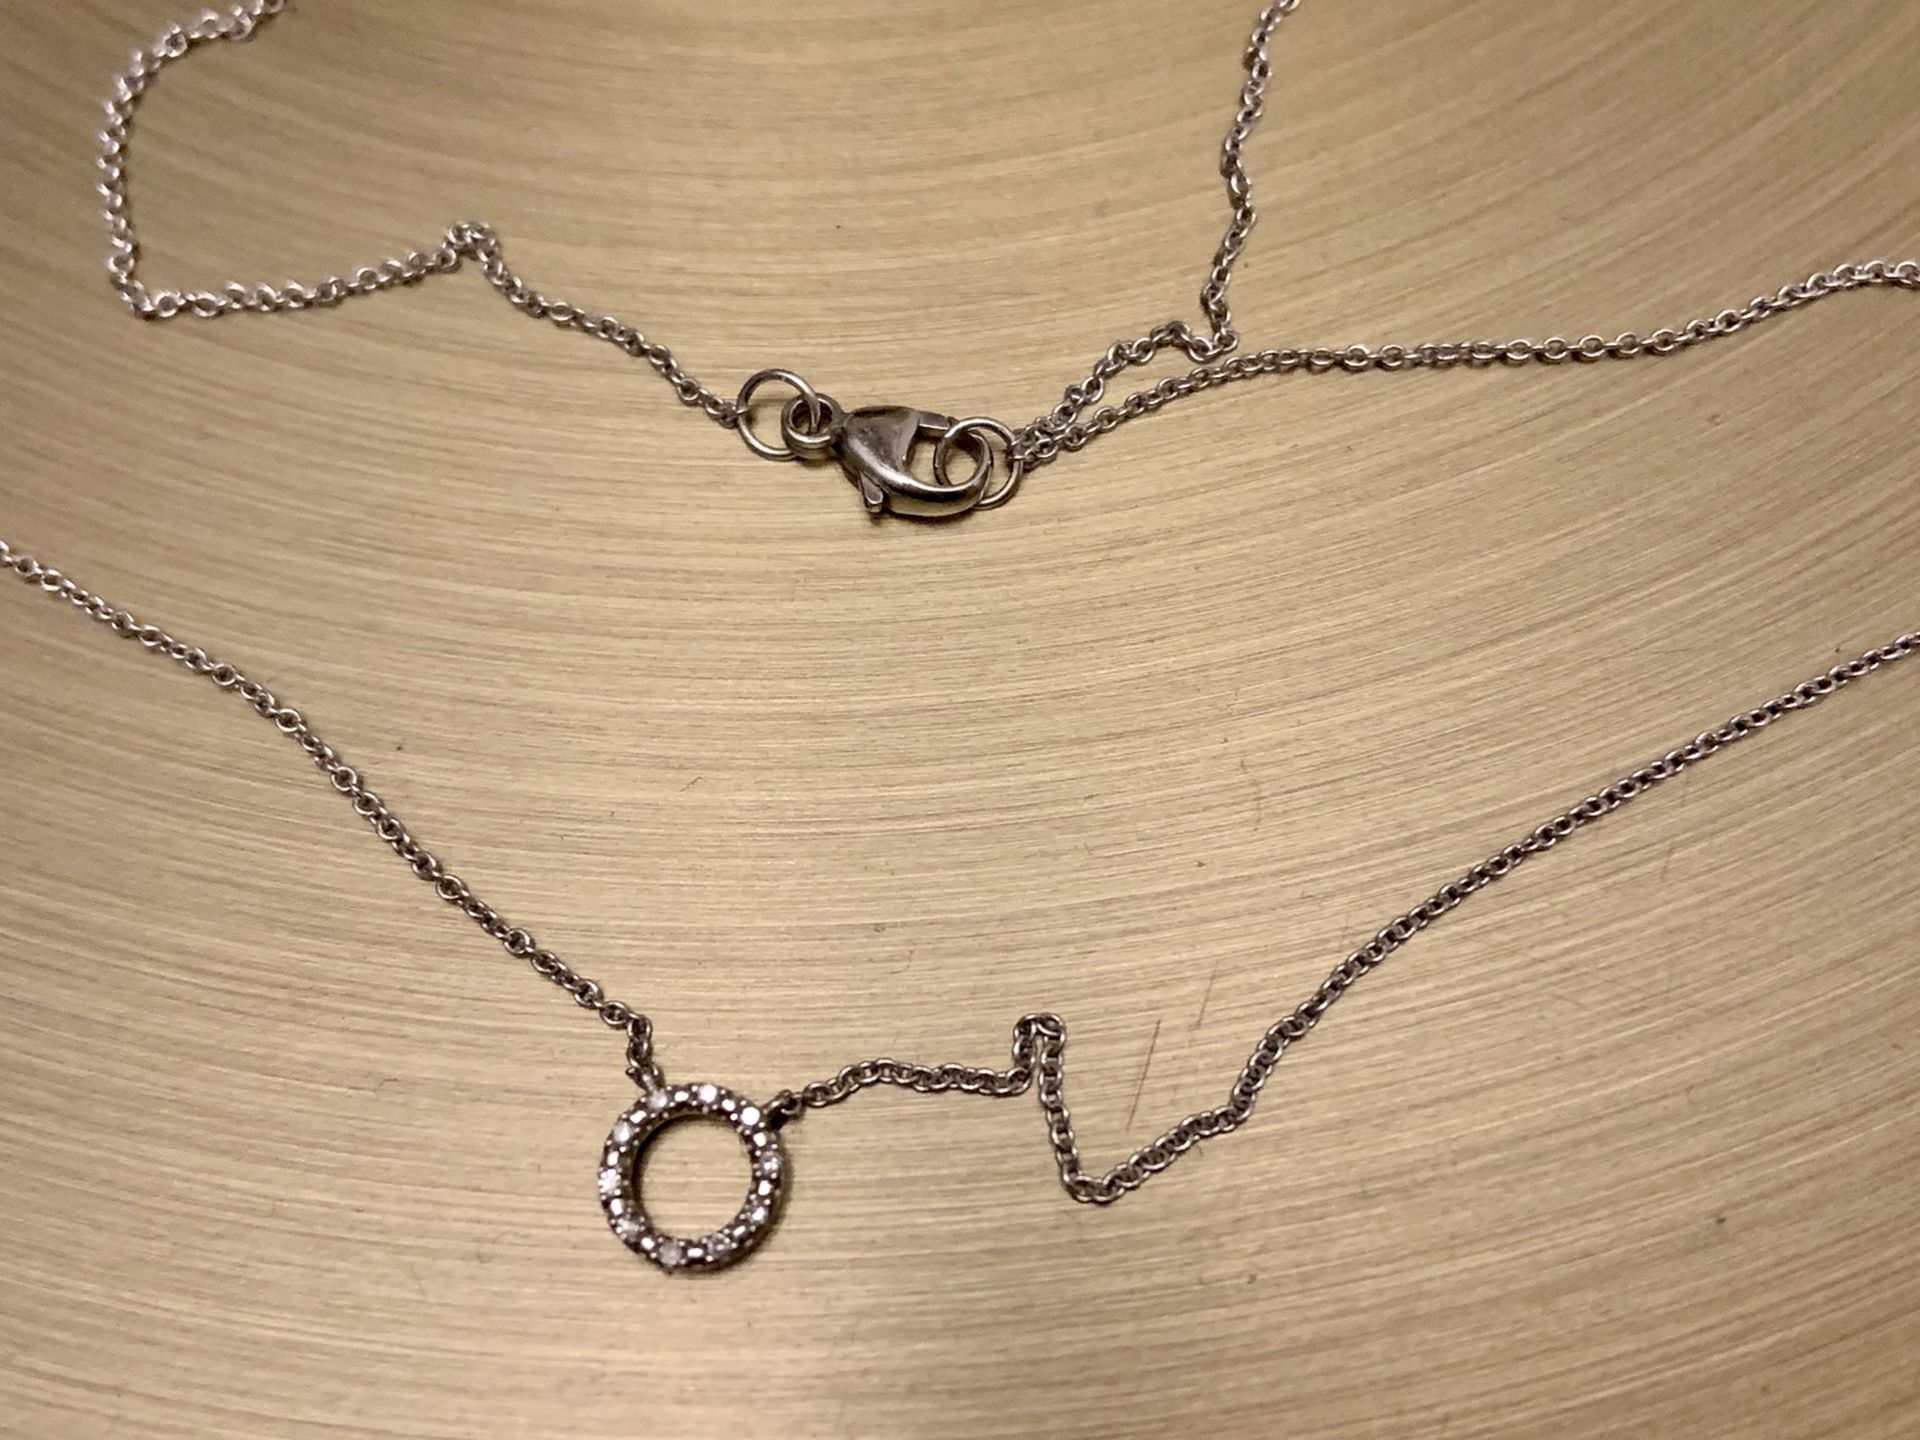 Silver And Cubic Zirconium Necklace